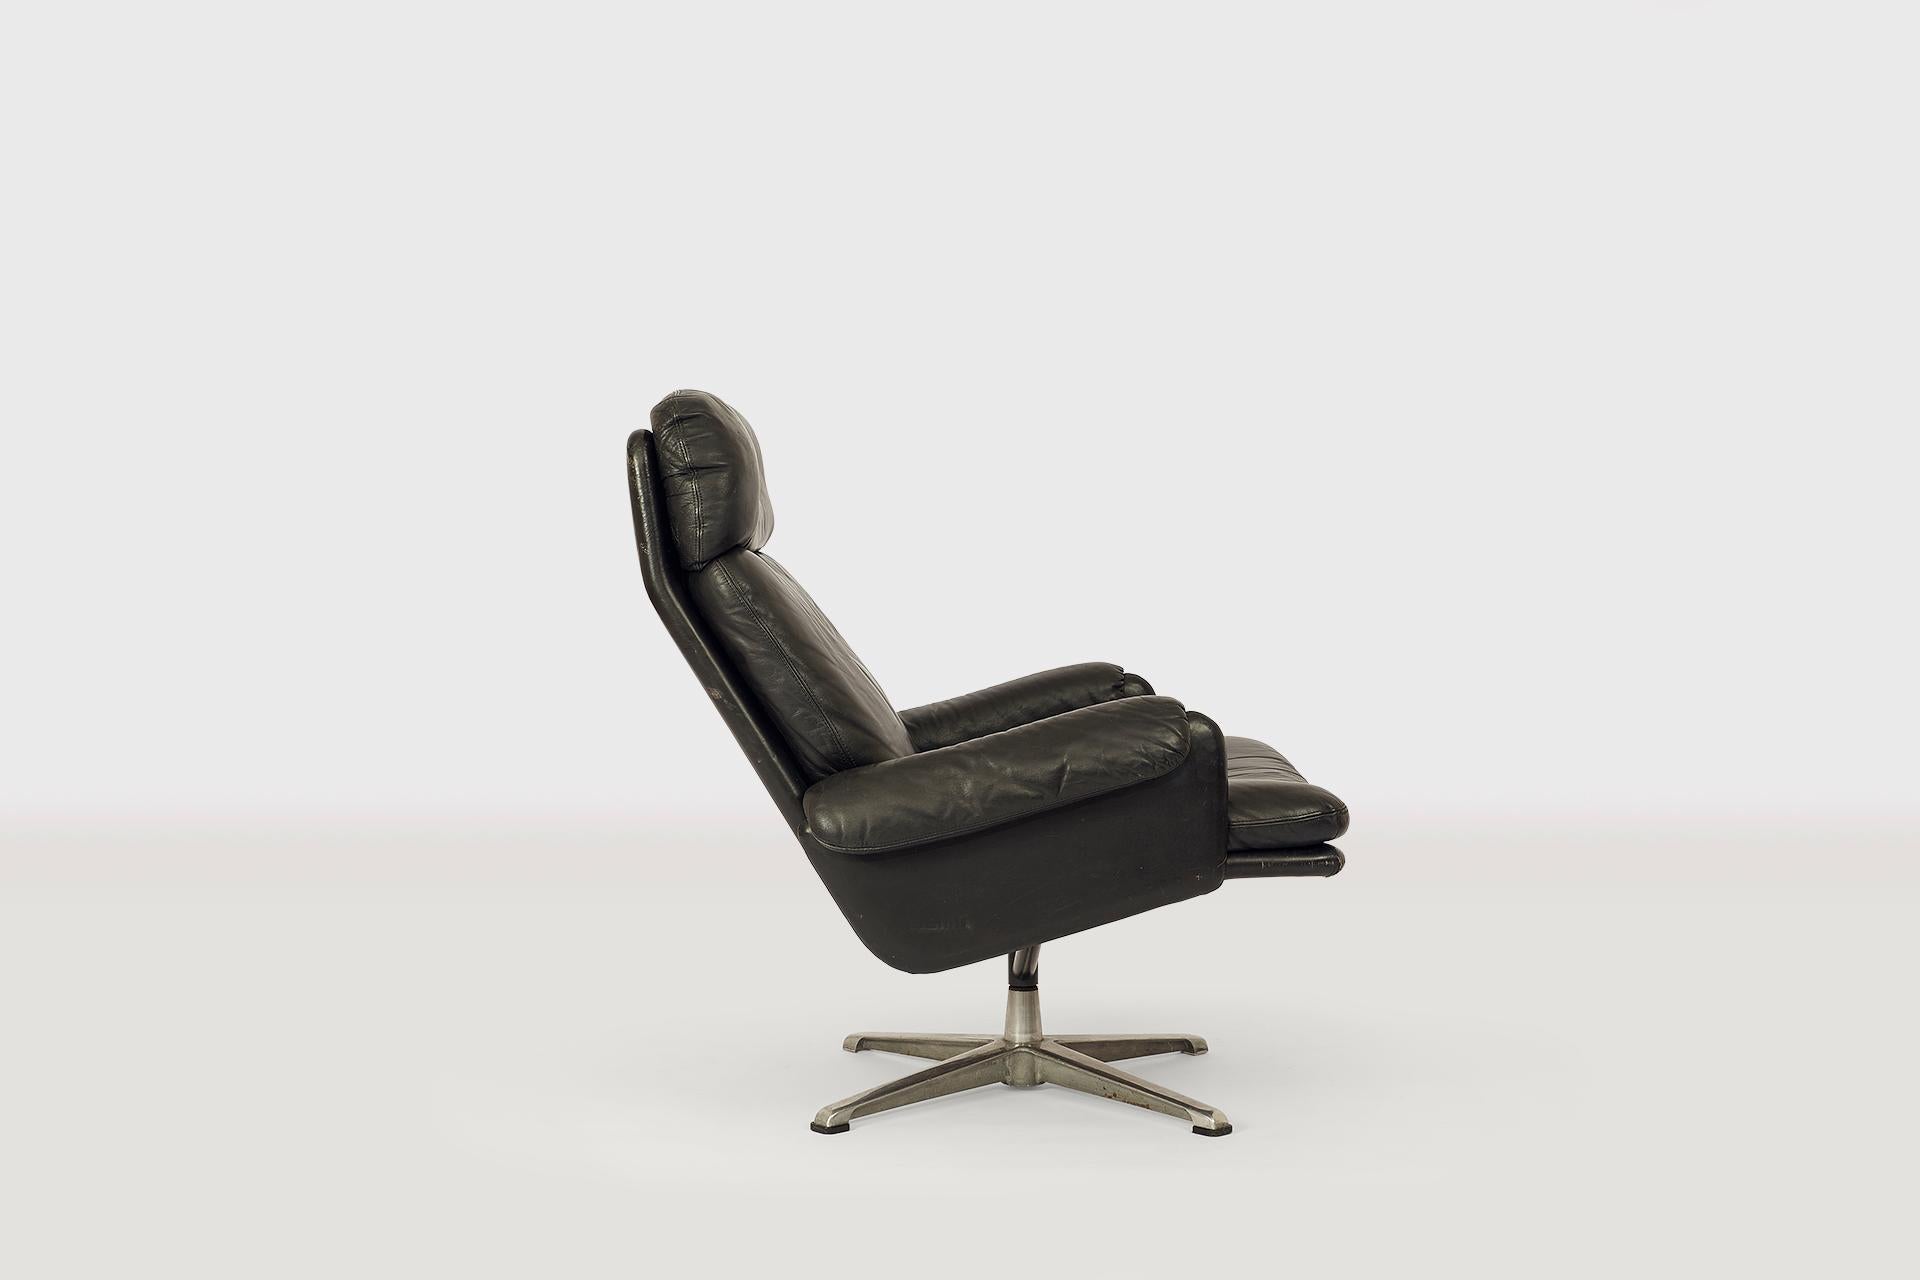 Comfortable and shapely lounge chair with black leather upholstery and aluminium frame in the stylish design of the 1970s. Leather in good shape with some scuffs here and there but overall in excellent vintage condition.